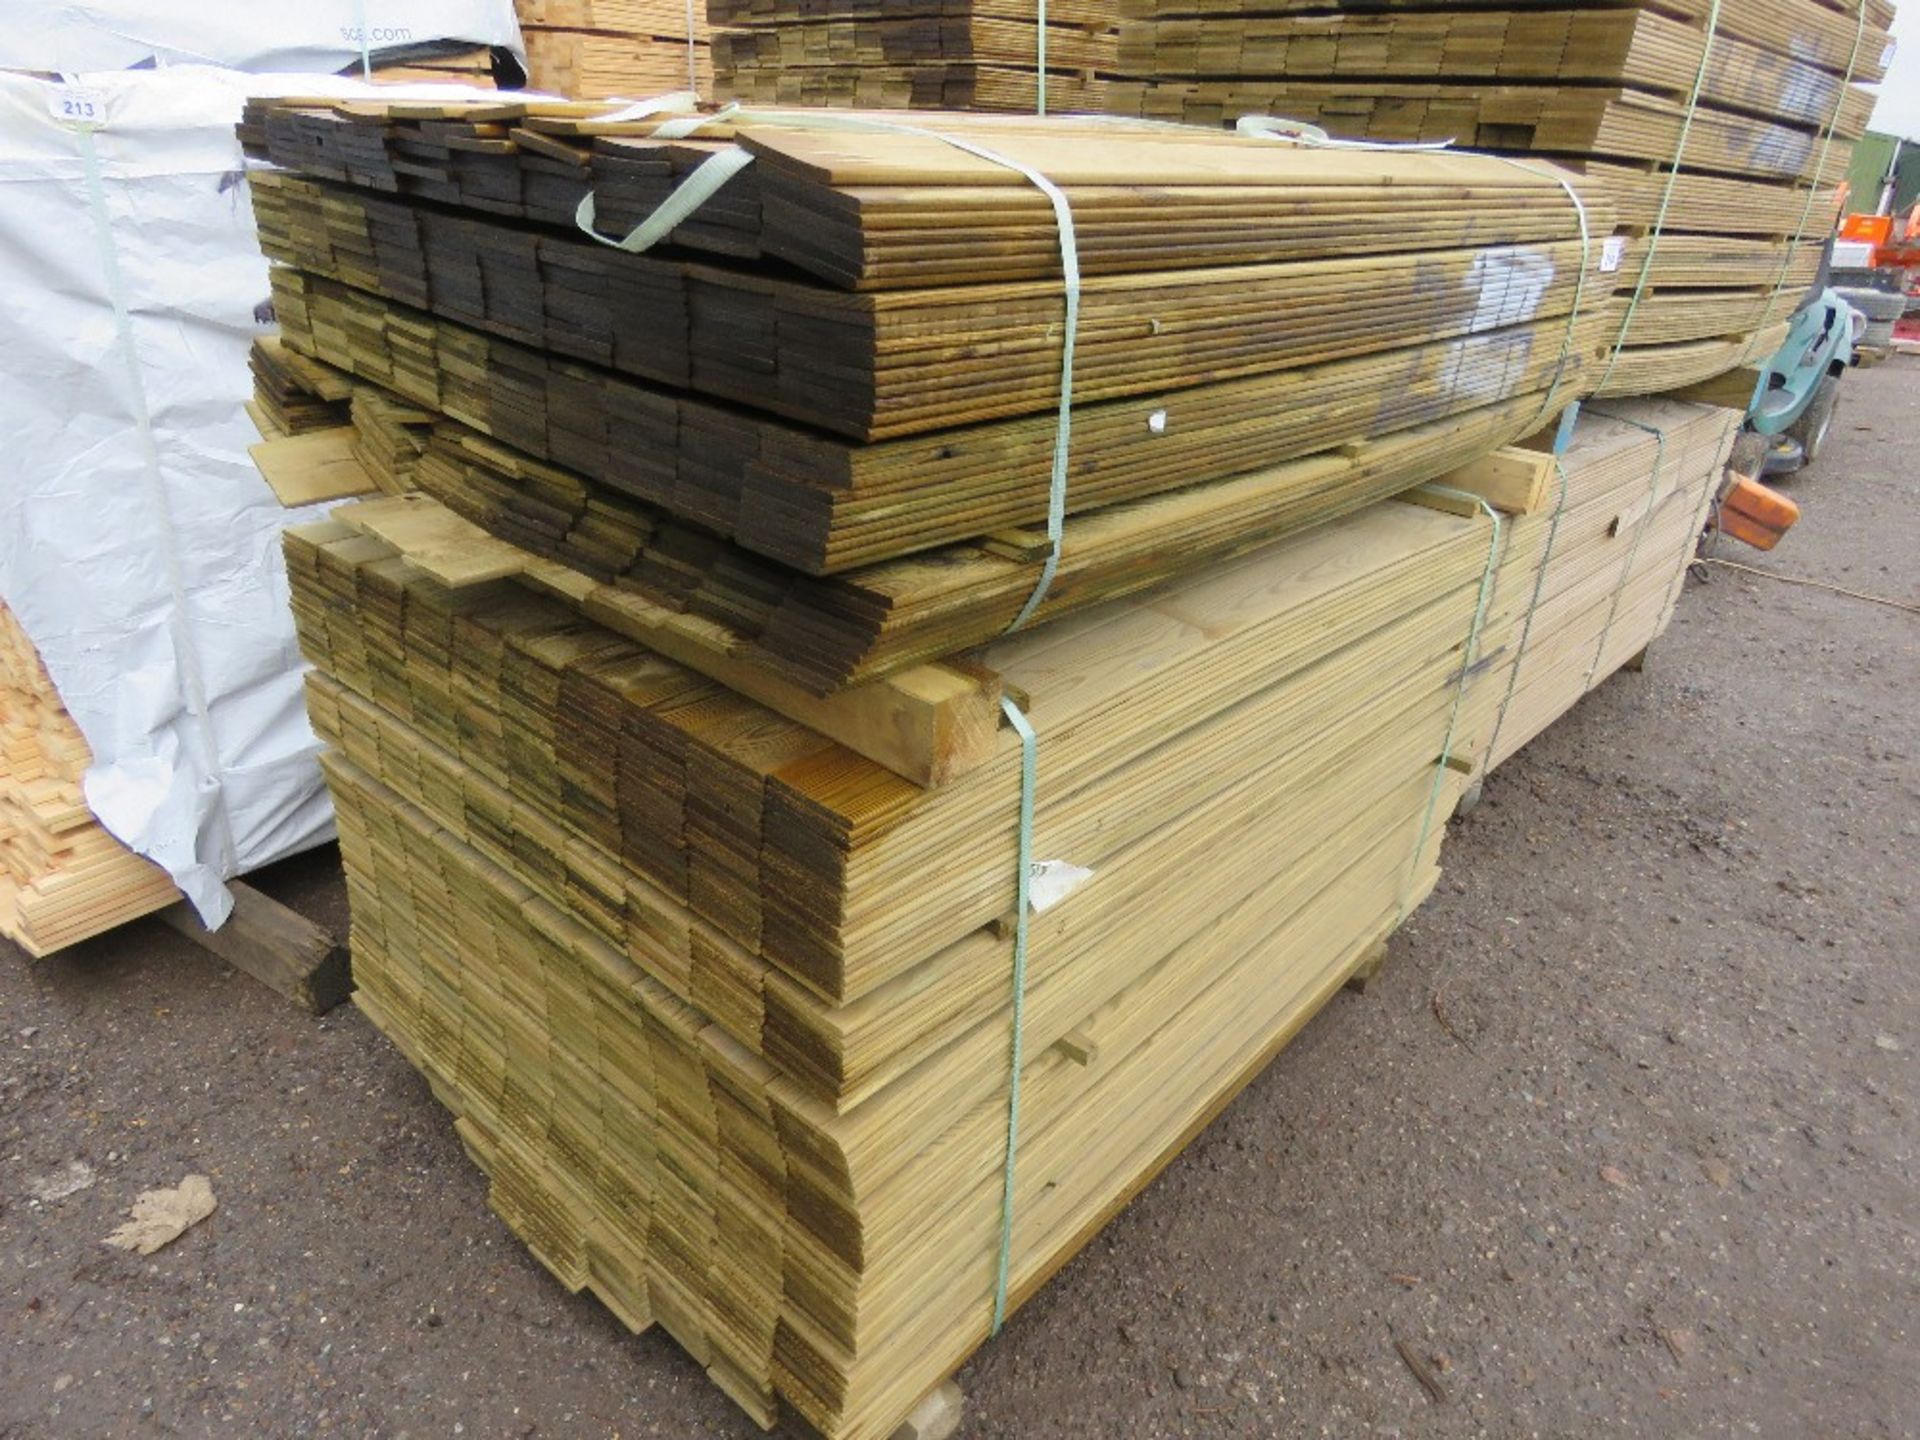 2 X PACKS OF PRESSURE TREATED HIT AND MISS FENCE CLADDING TIMBER BOARDS: 1.45M LENGTH X 100MM WIDTH